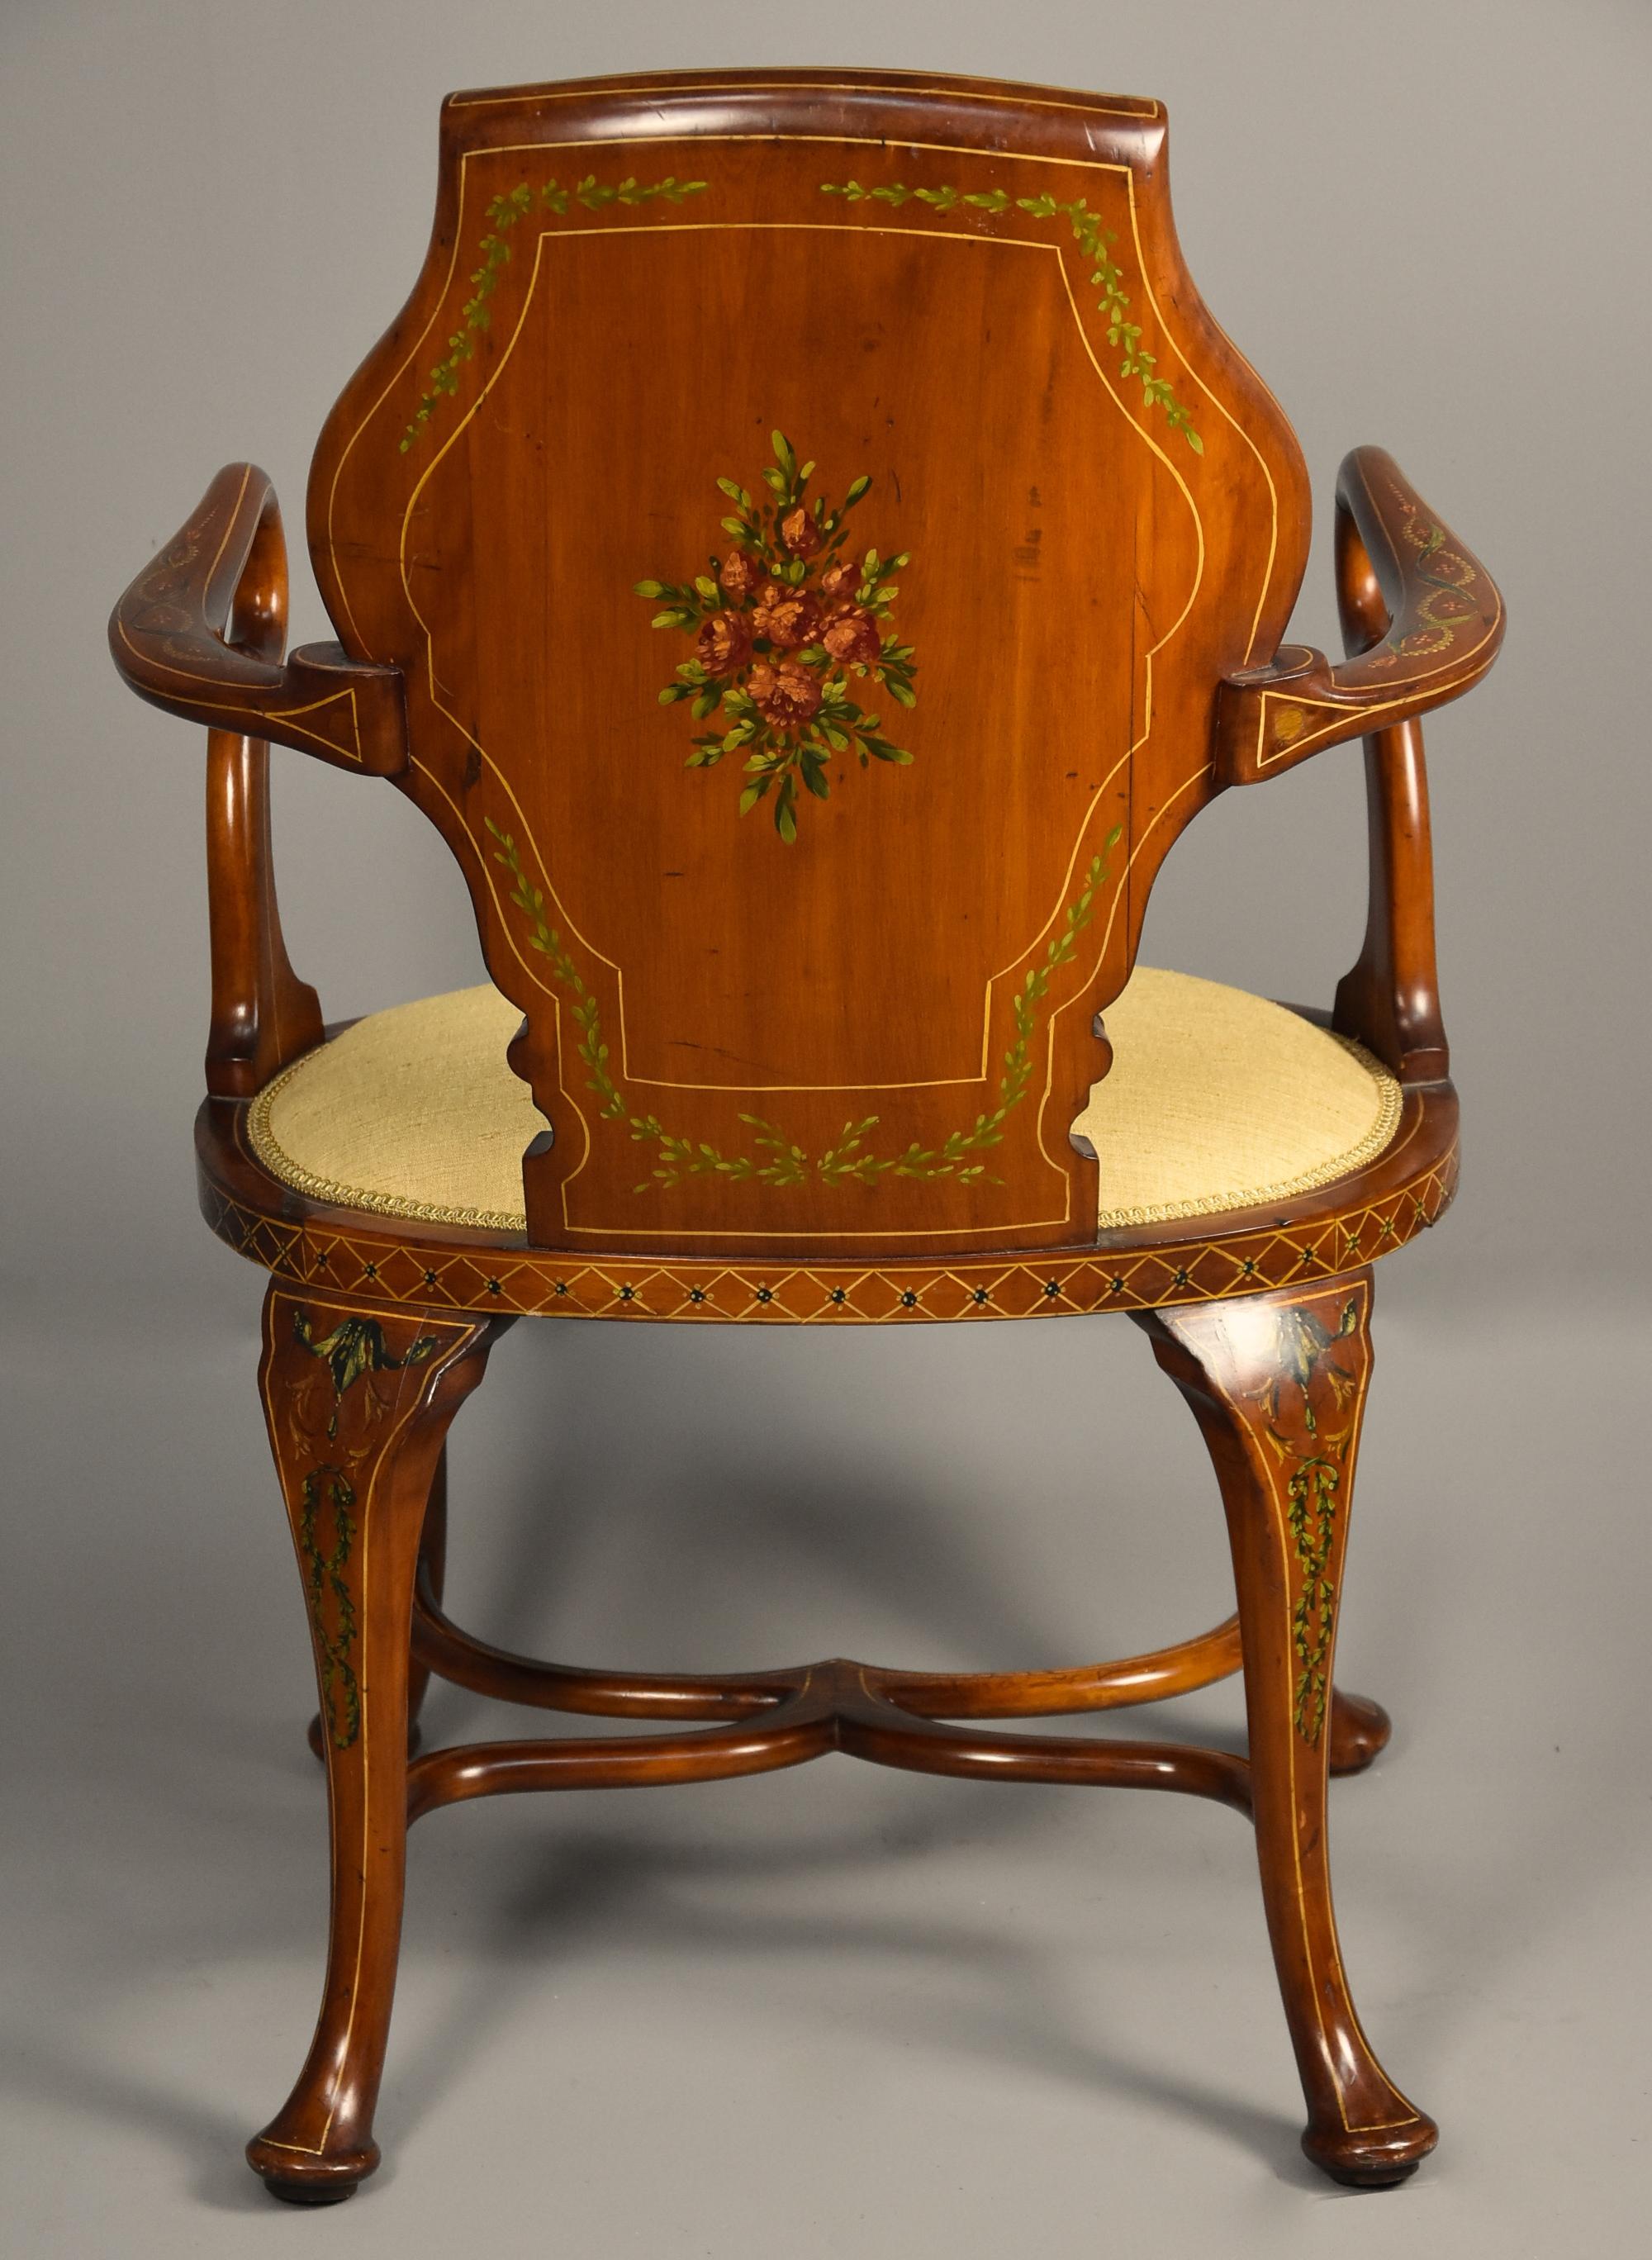 Highly Decorative Edwardian Satinwood and Painted Armchair in the Georgian Style For Sale 6